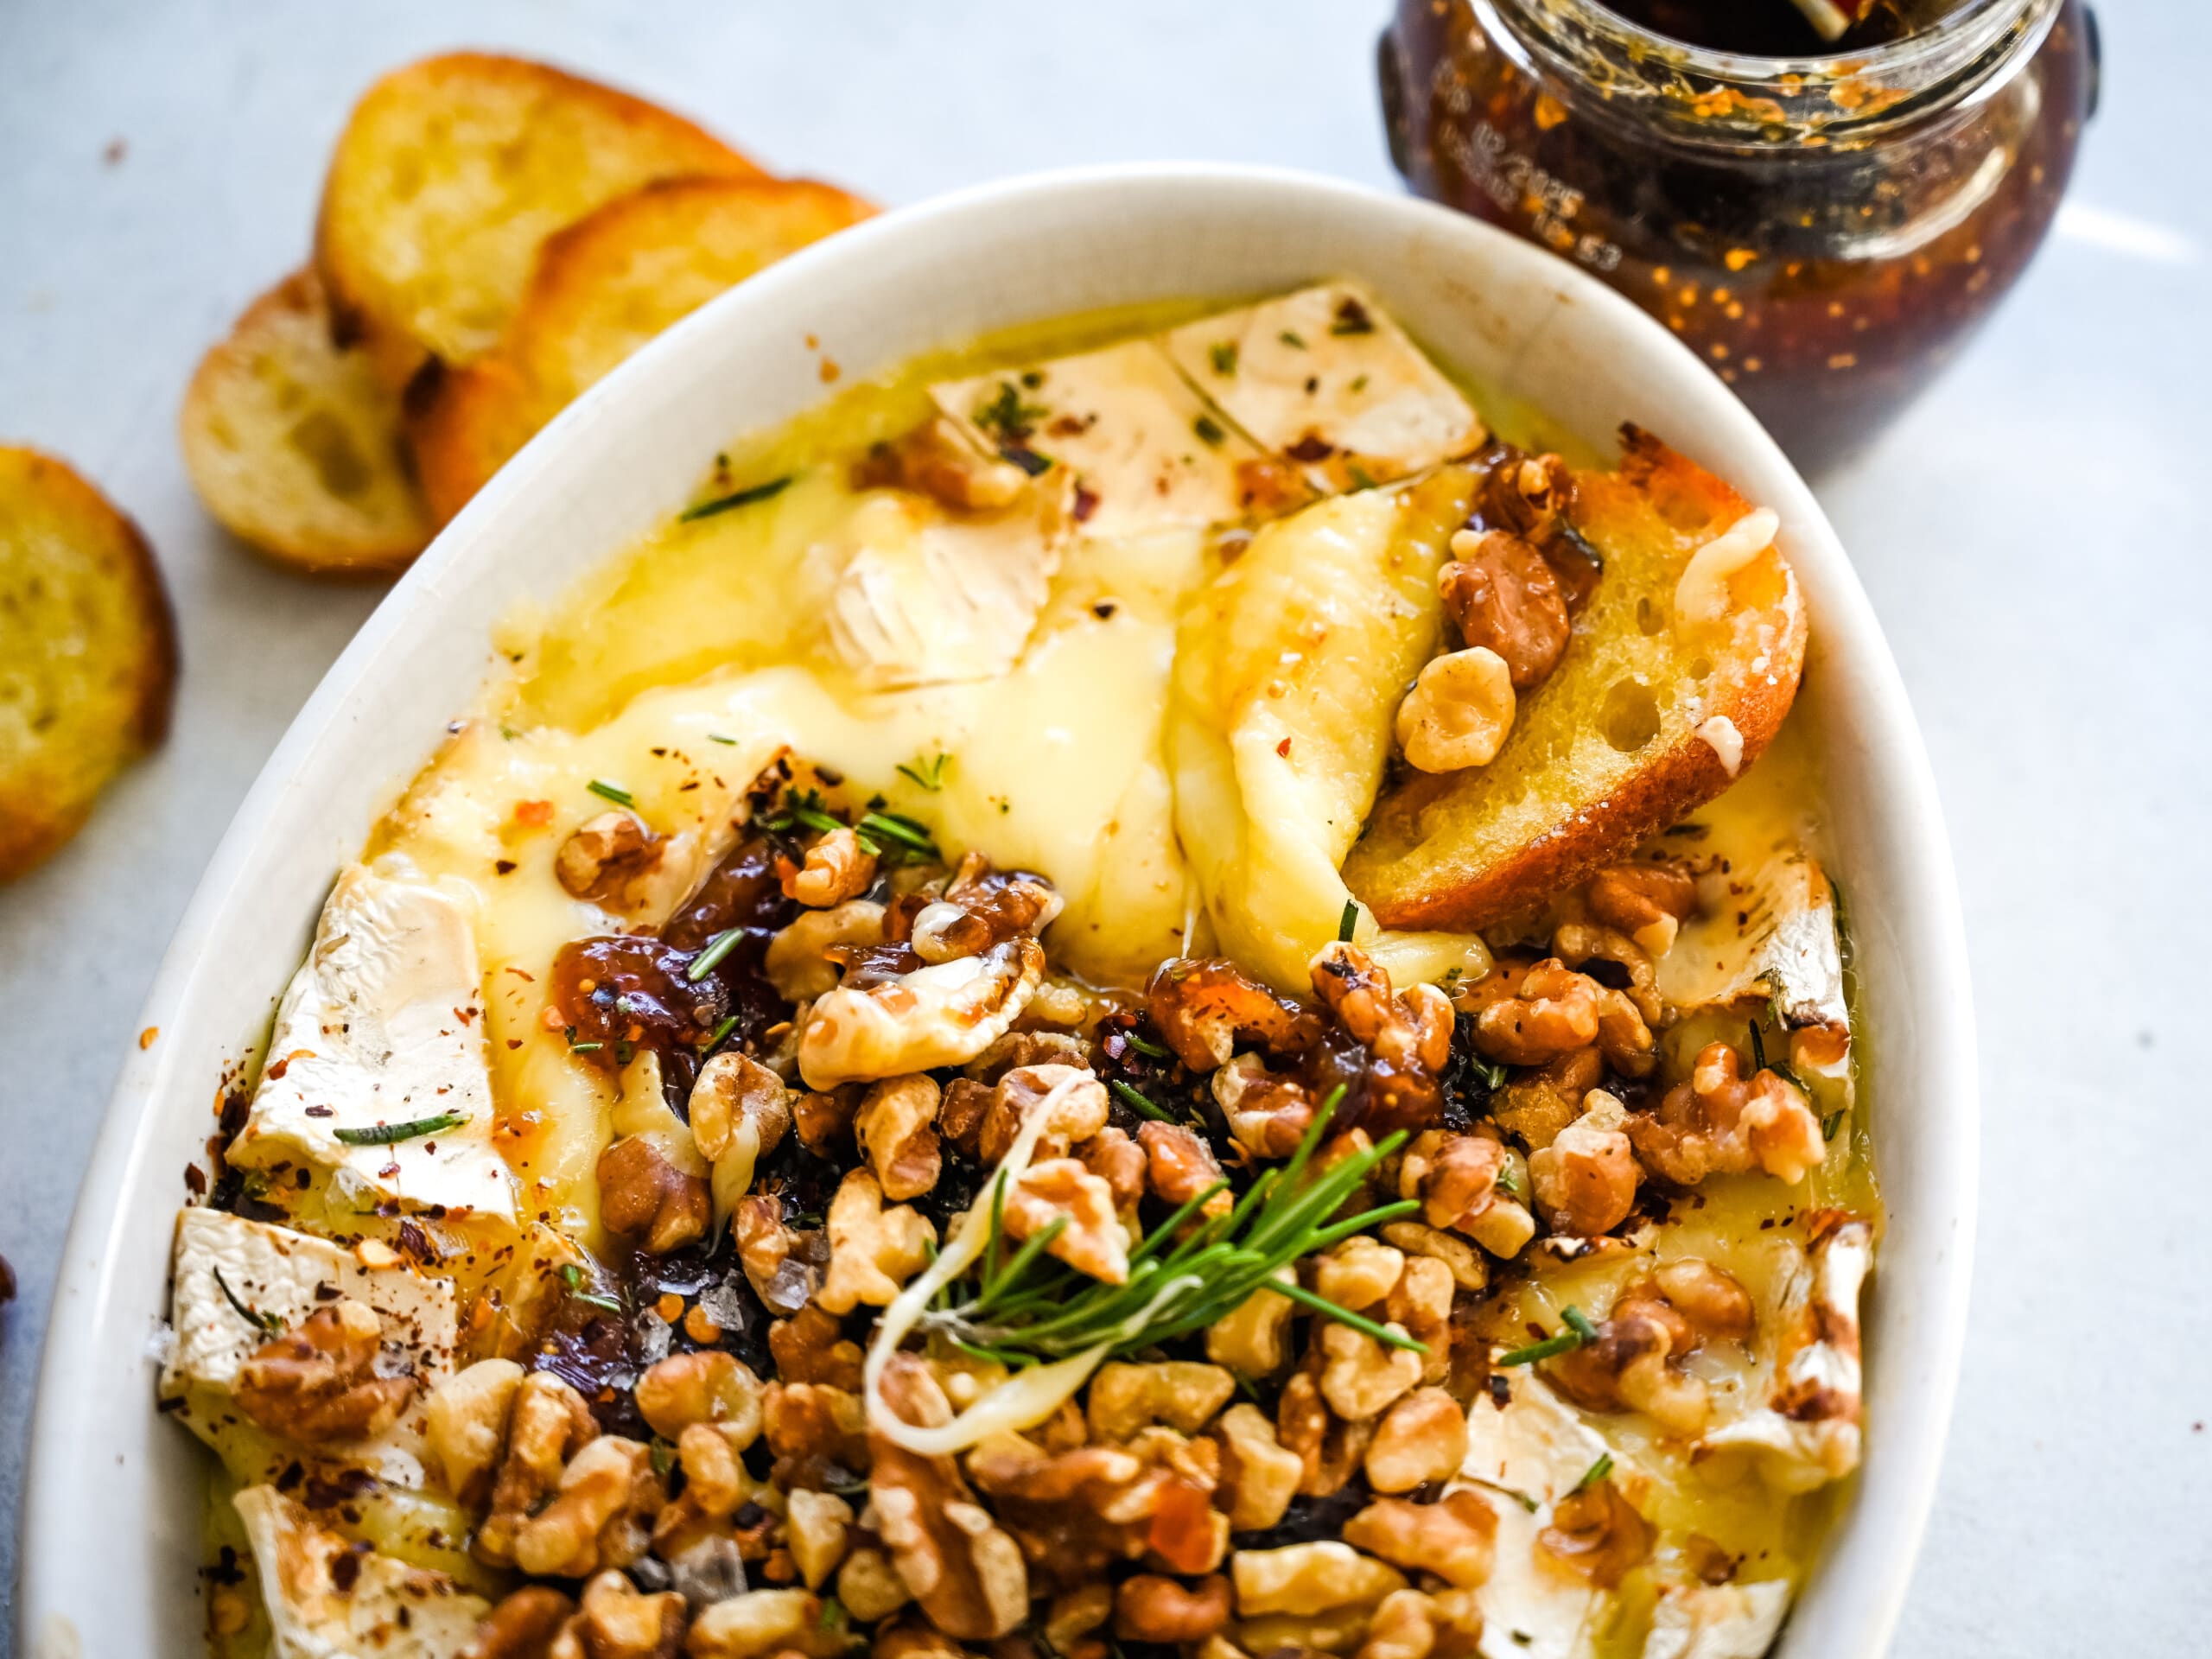 Baked Brie with Garlic - The Art of Food and Wine